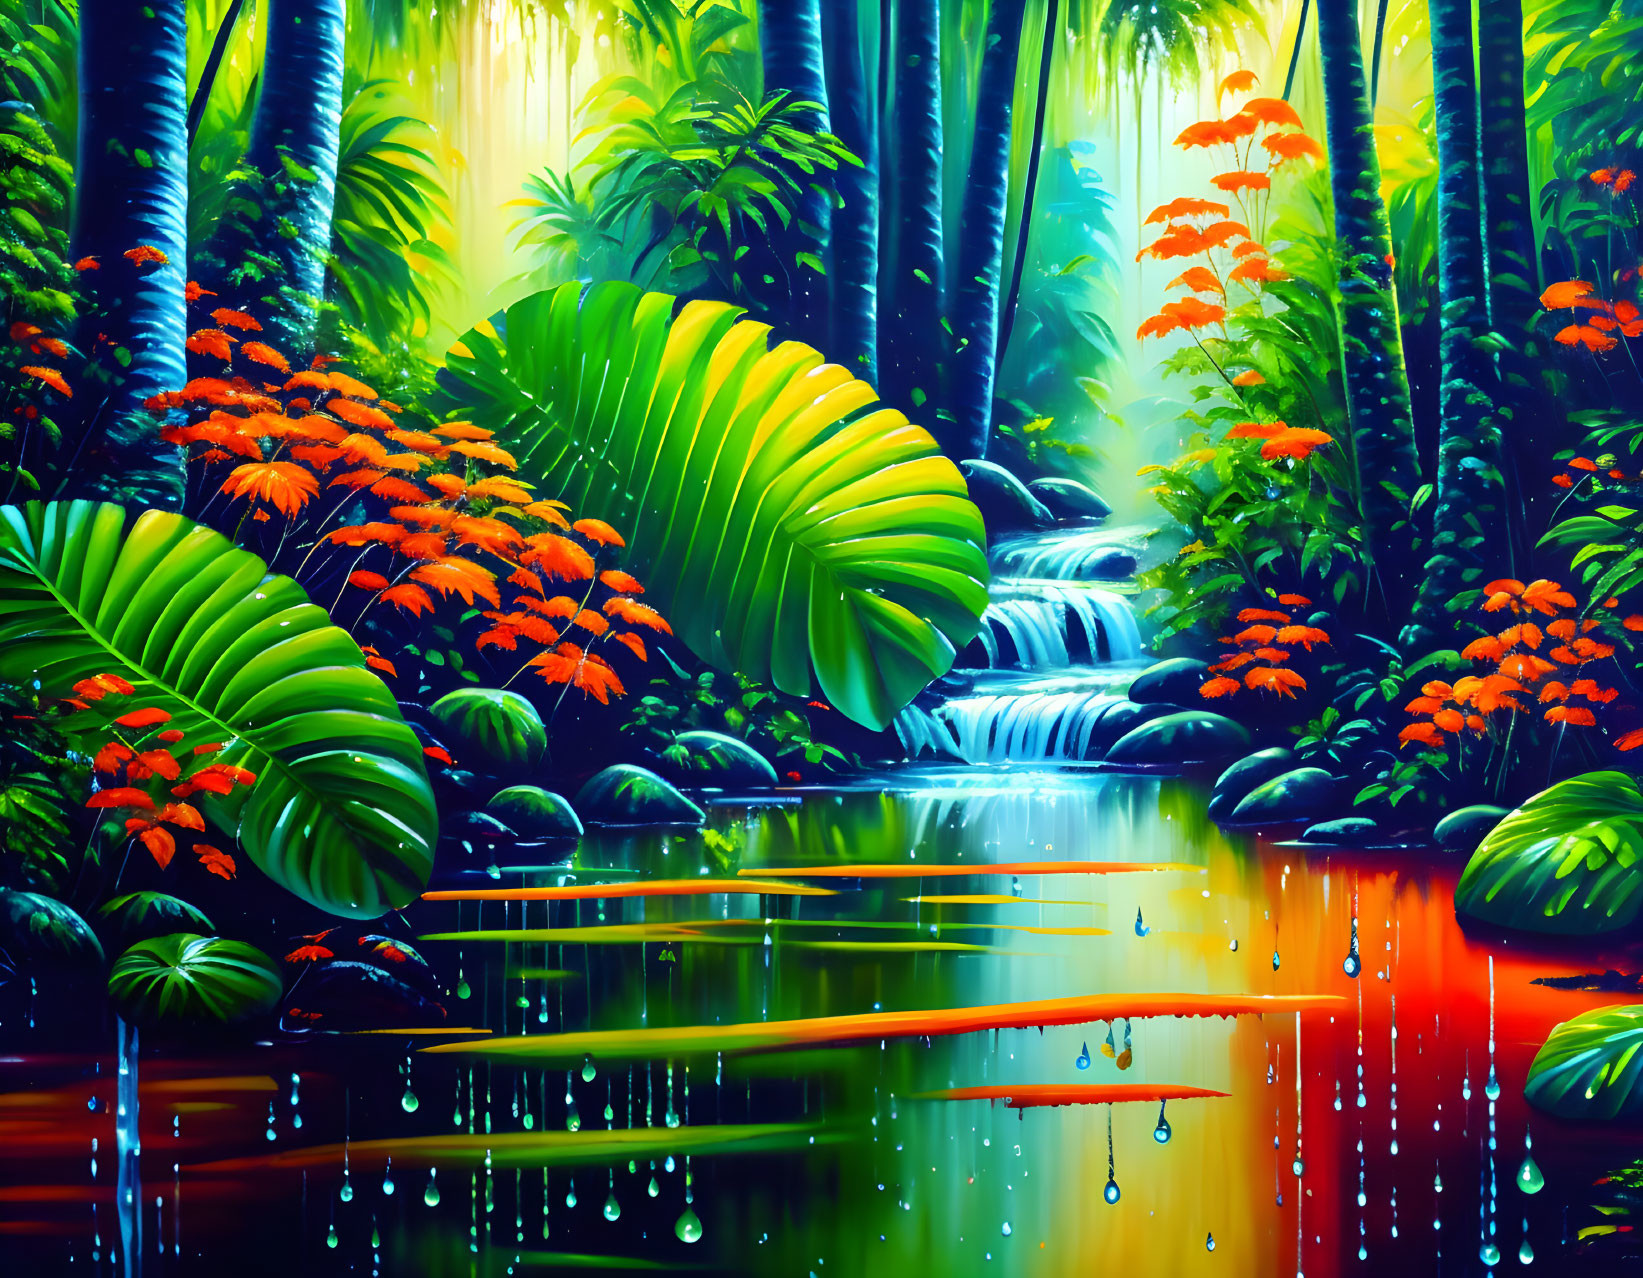 Saturated Serenity: A Rainforest After the Storm